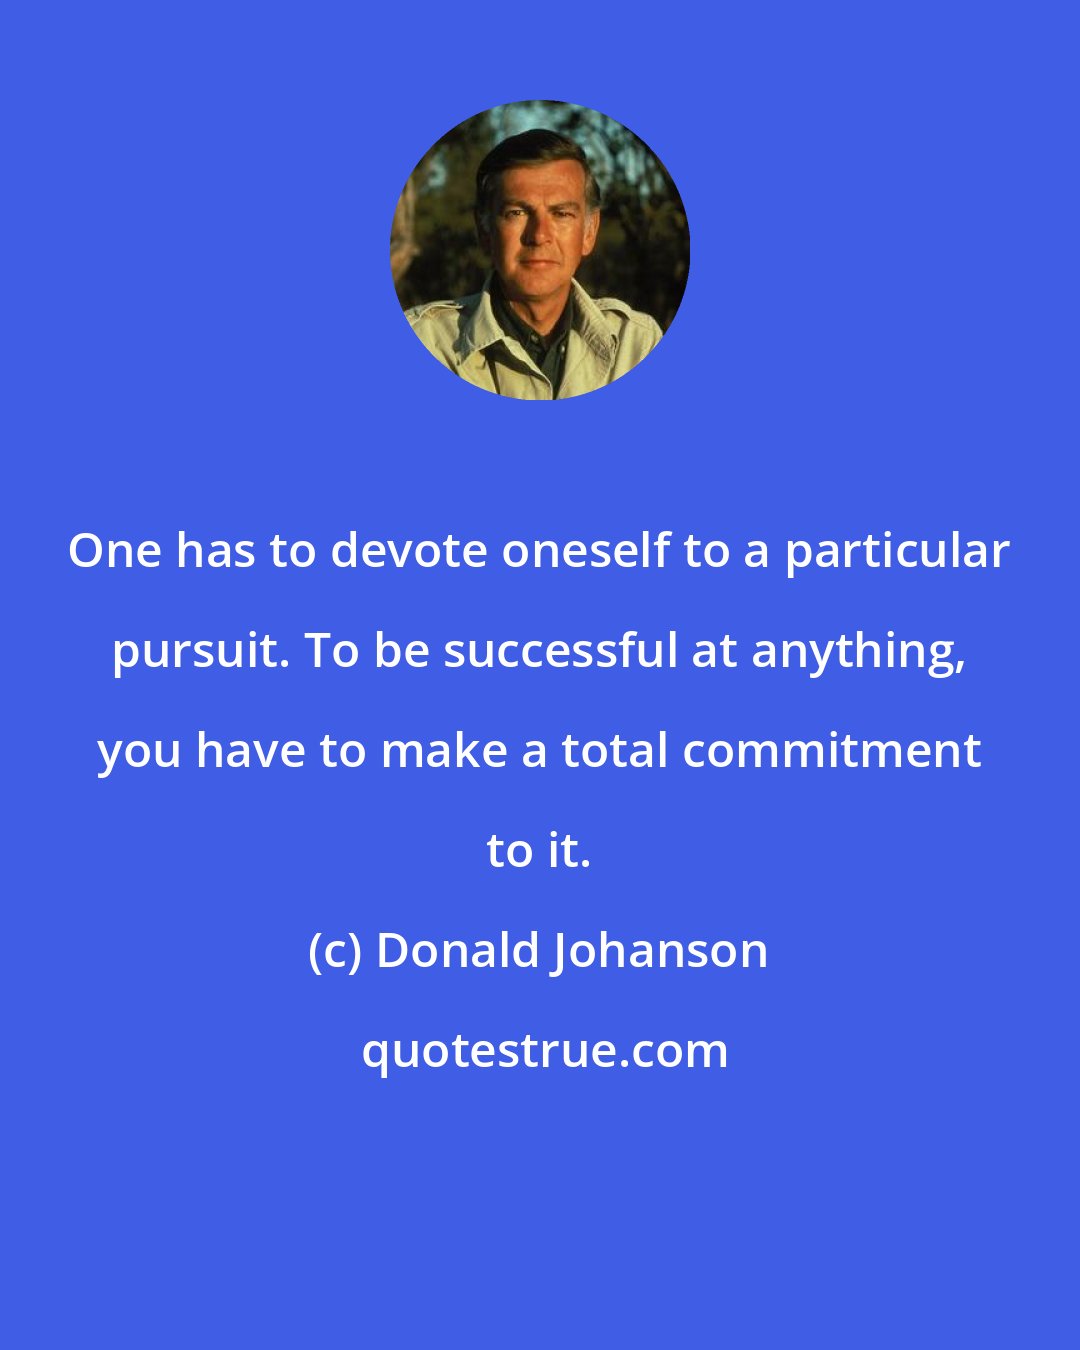 Donald Johanson: One has to devote oneself to a particular pursuit. To be successful at anything, you have to make a total commitment to it.